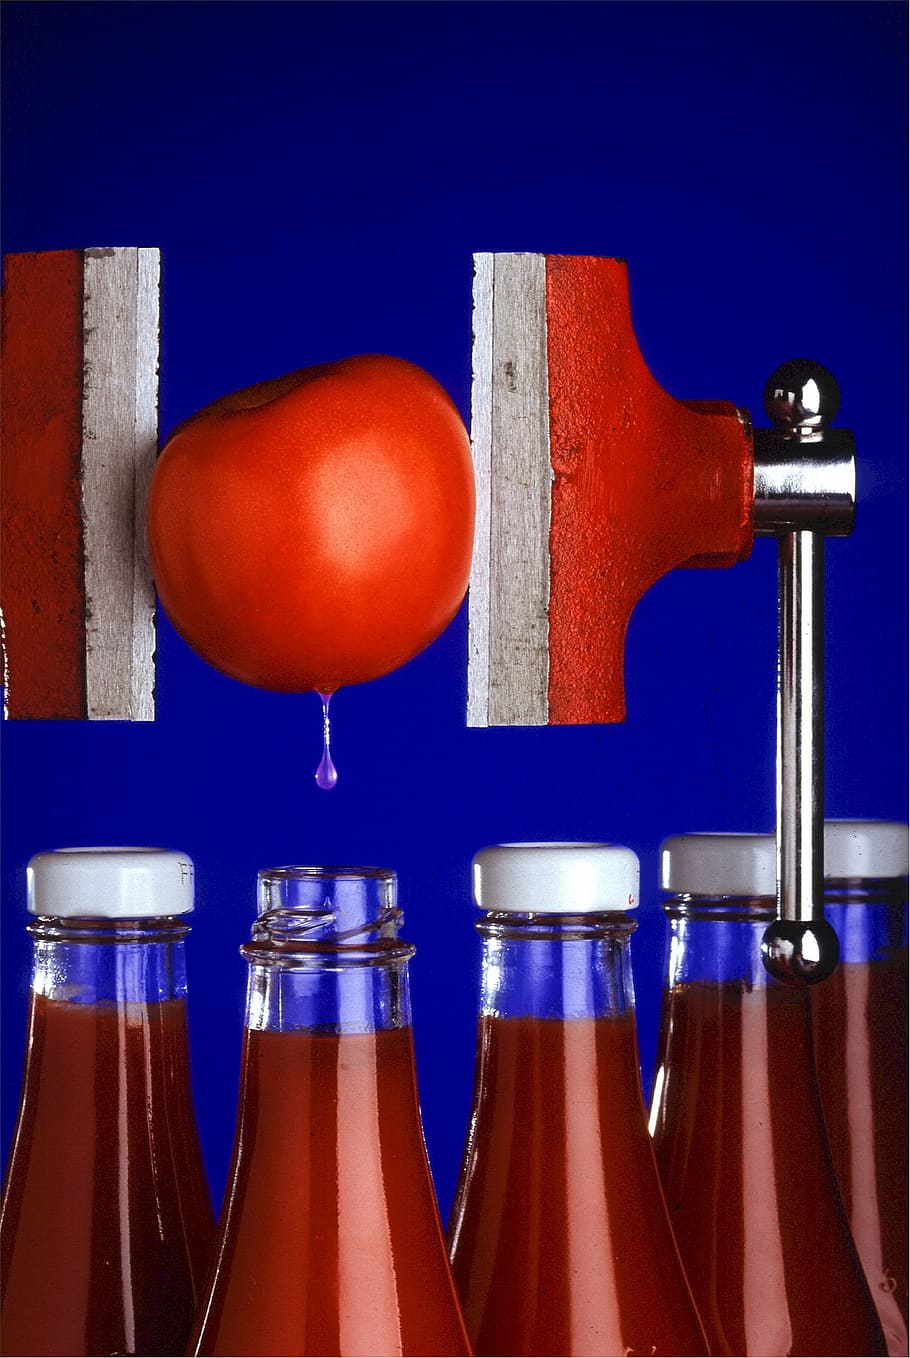 Ketchup, Ingredient, Tomato, Sauce, tomato, sauce, condiment, catsup, vegetable, spice, flavor